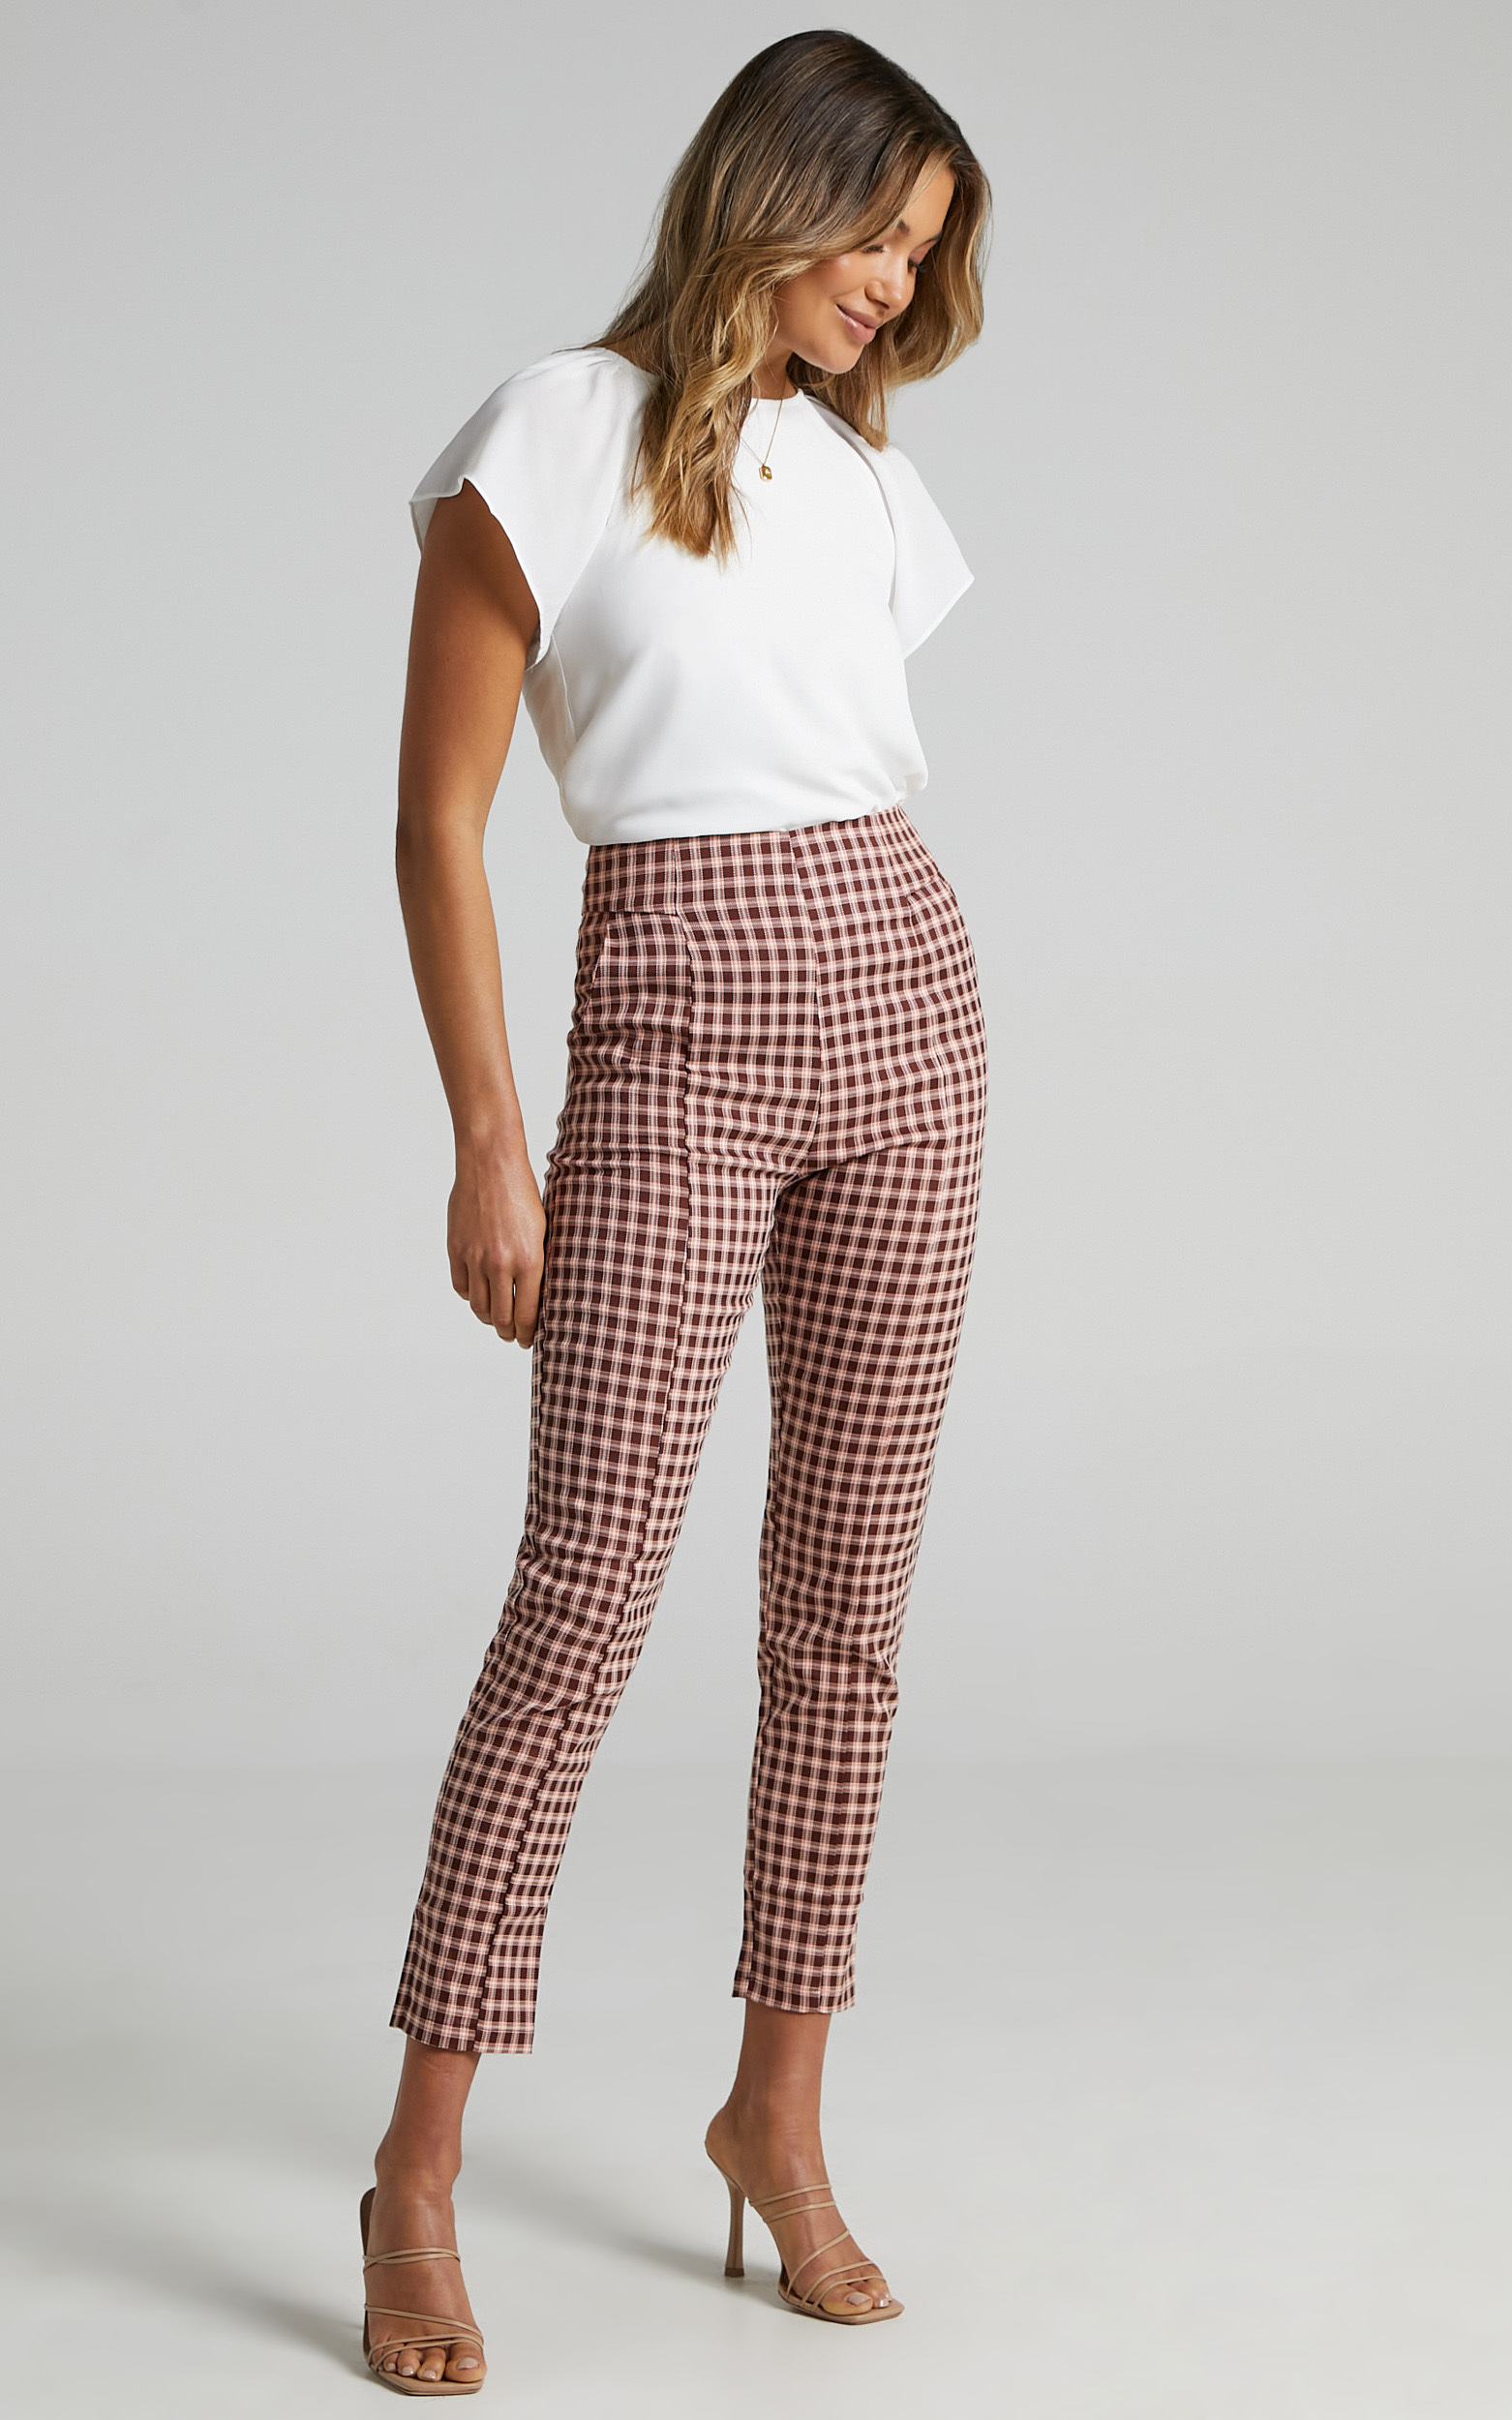 Otis Pants in Red Check - 12 (L), RED1, hi-res image number null